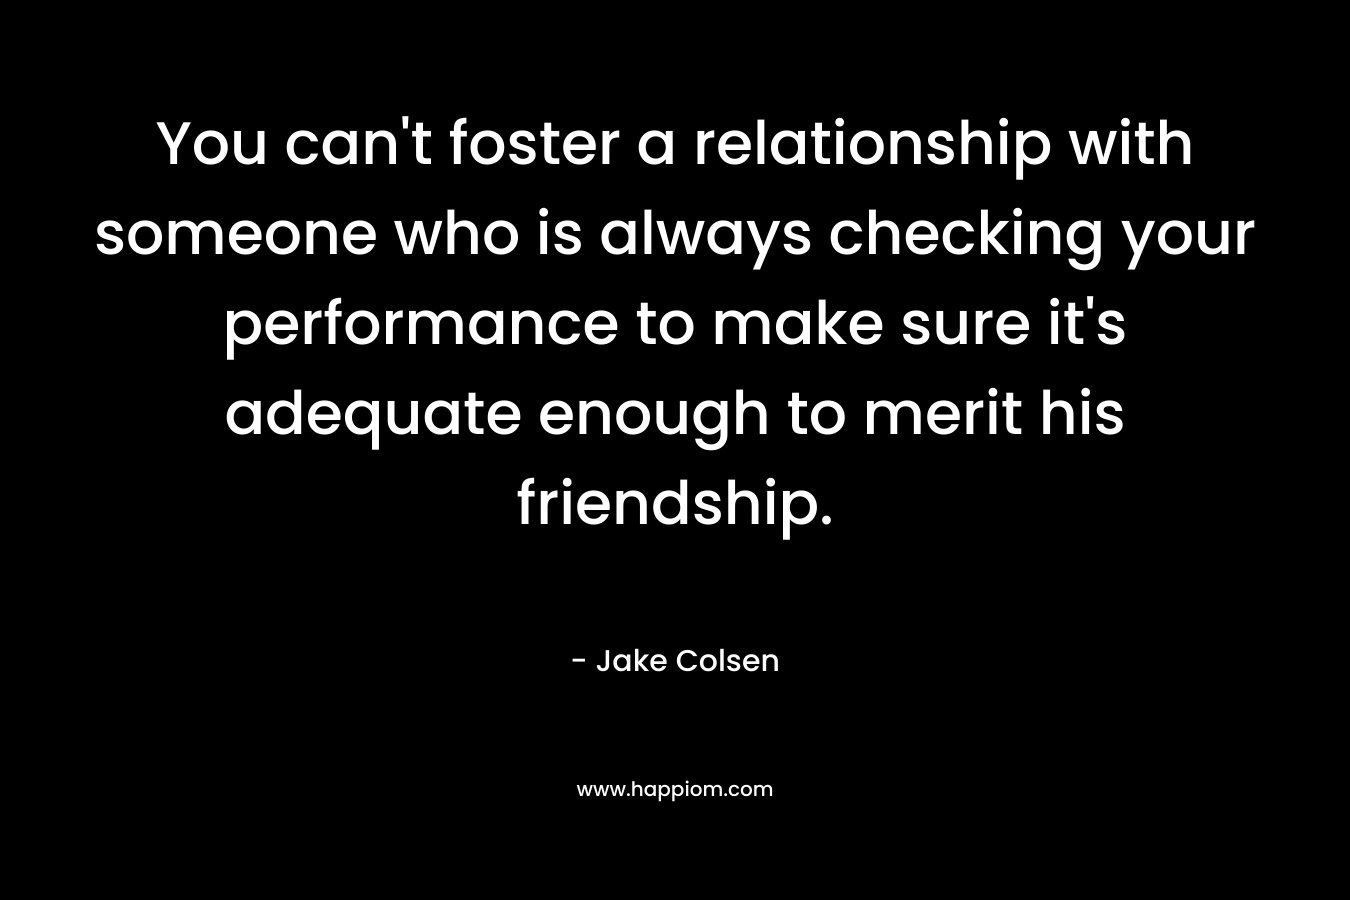 You can’t foster a relationship with someone who is always checking your performance to make sure it’s adequate enough to merit his friendship. – Jake Colsen